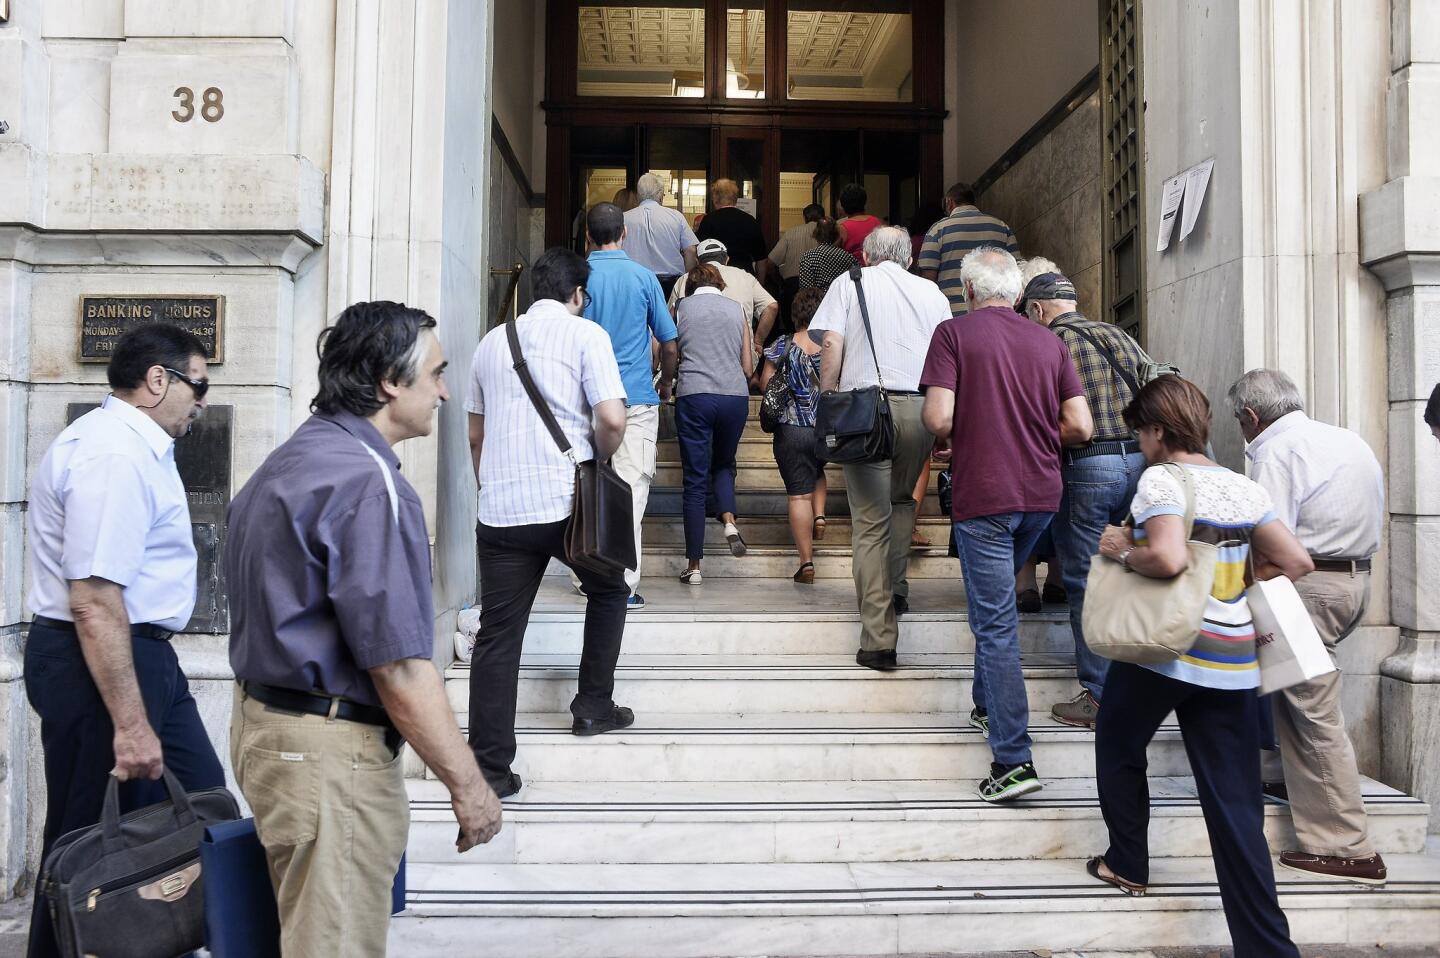 A National Bank official opens the door of a bank branch as people enter after Greek banks reopened on Monday morning after three weeks of closure in Athens.